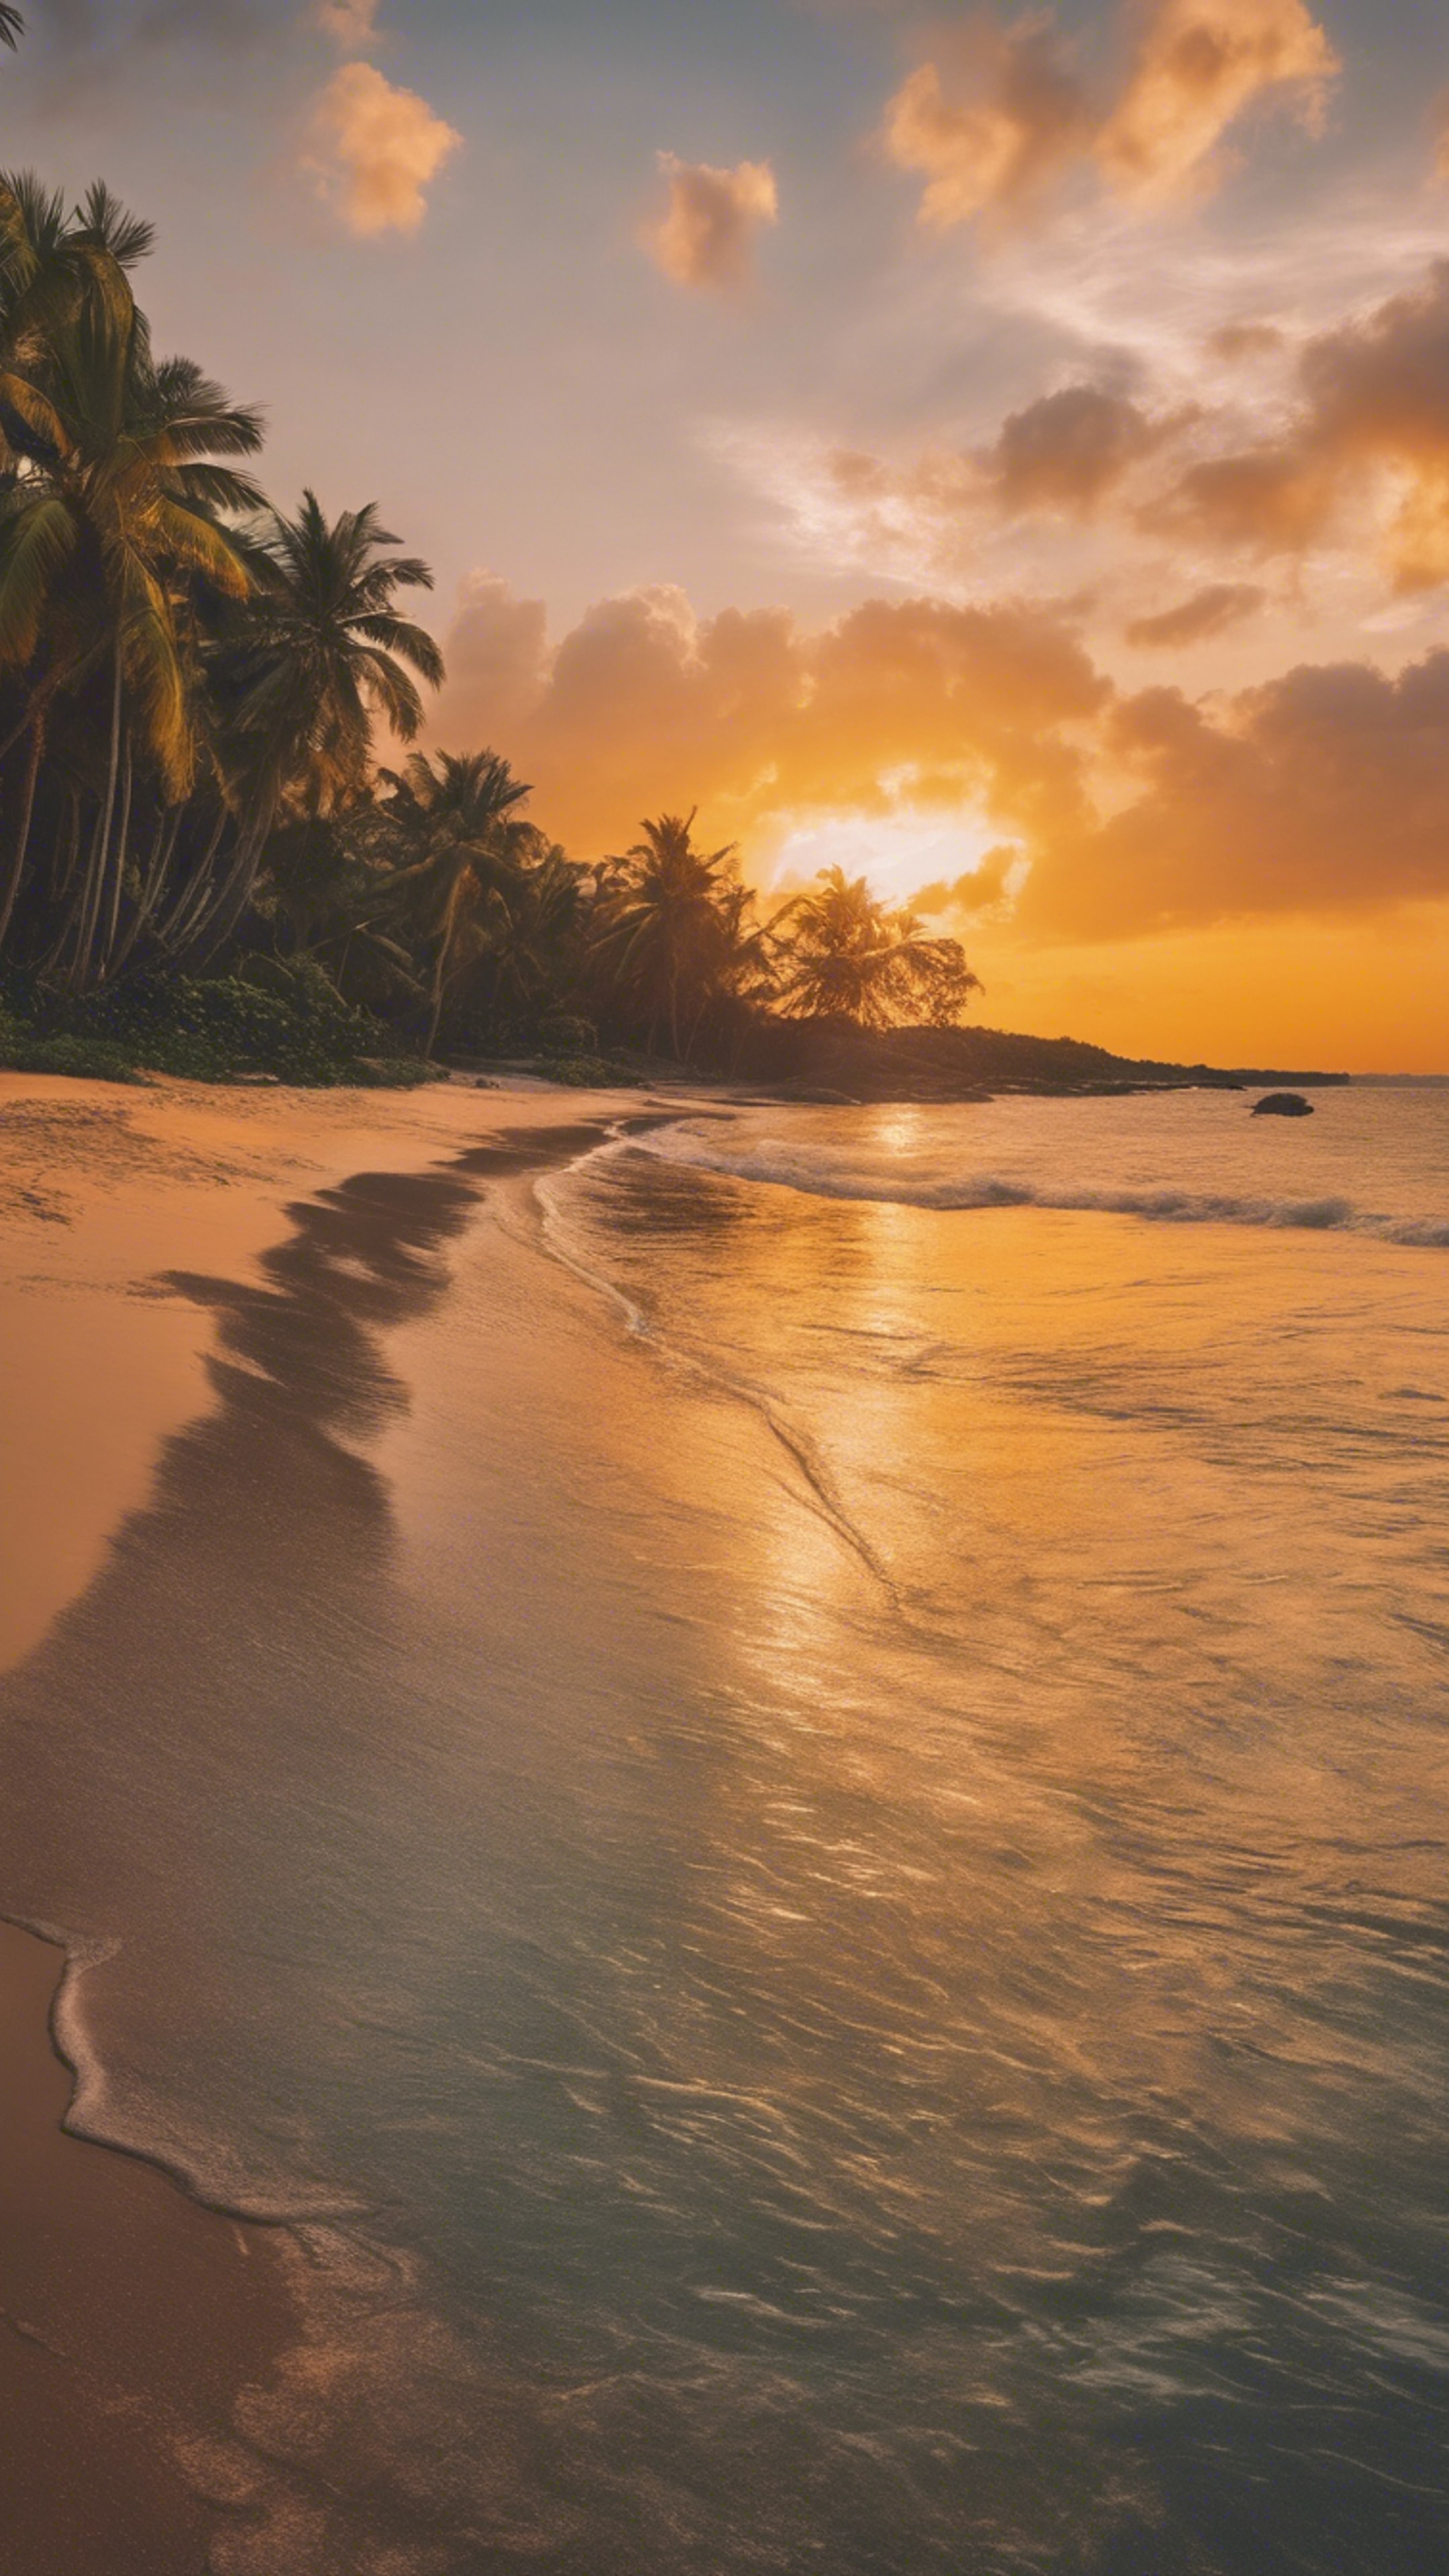 A tropical beach at sunset with hues of orange and yellow gently reflecting on the clear water. Wallpaper[f1cd0a05f1594f21a6bf]